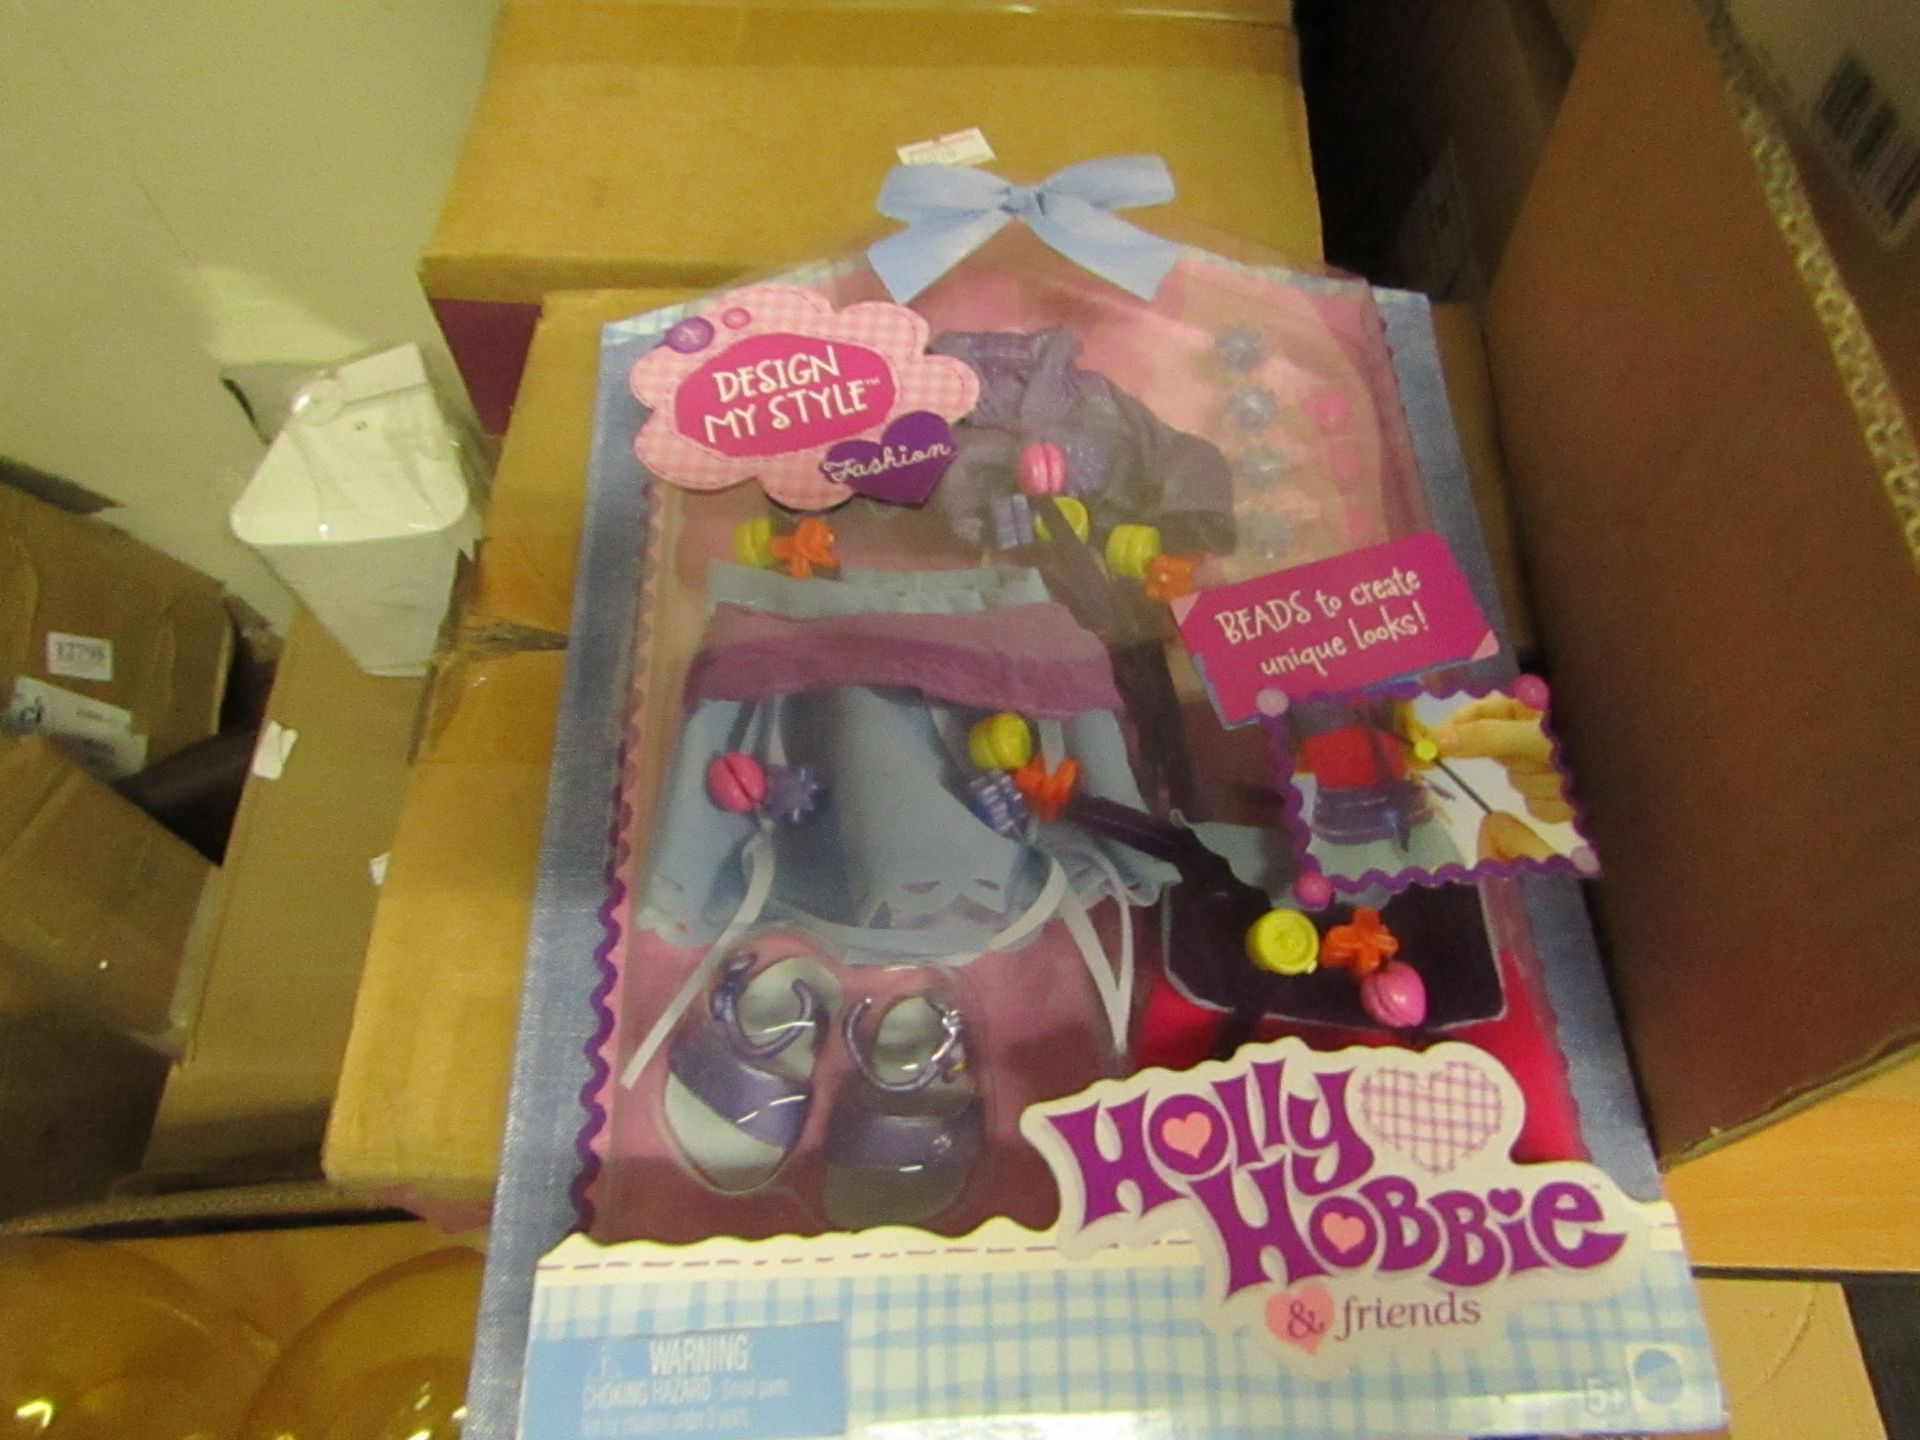 12 x Holly Hobbie Designmy style sets. See Image. New & Boxed